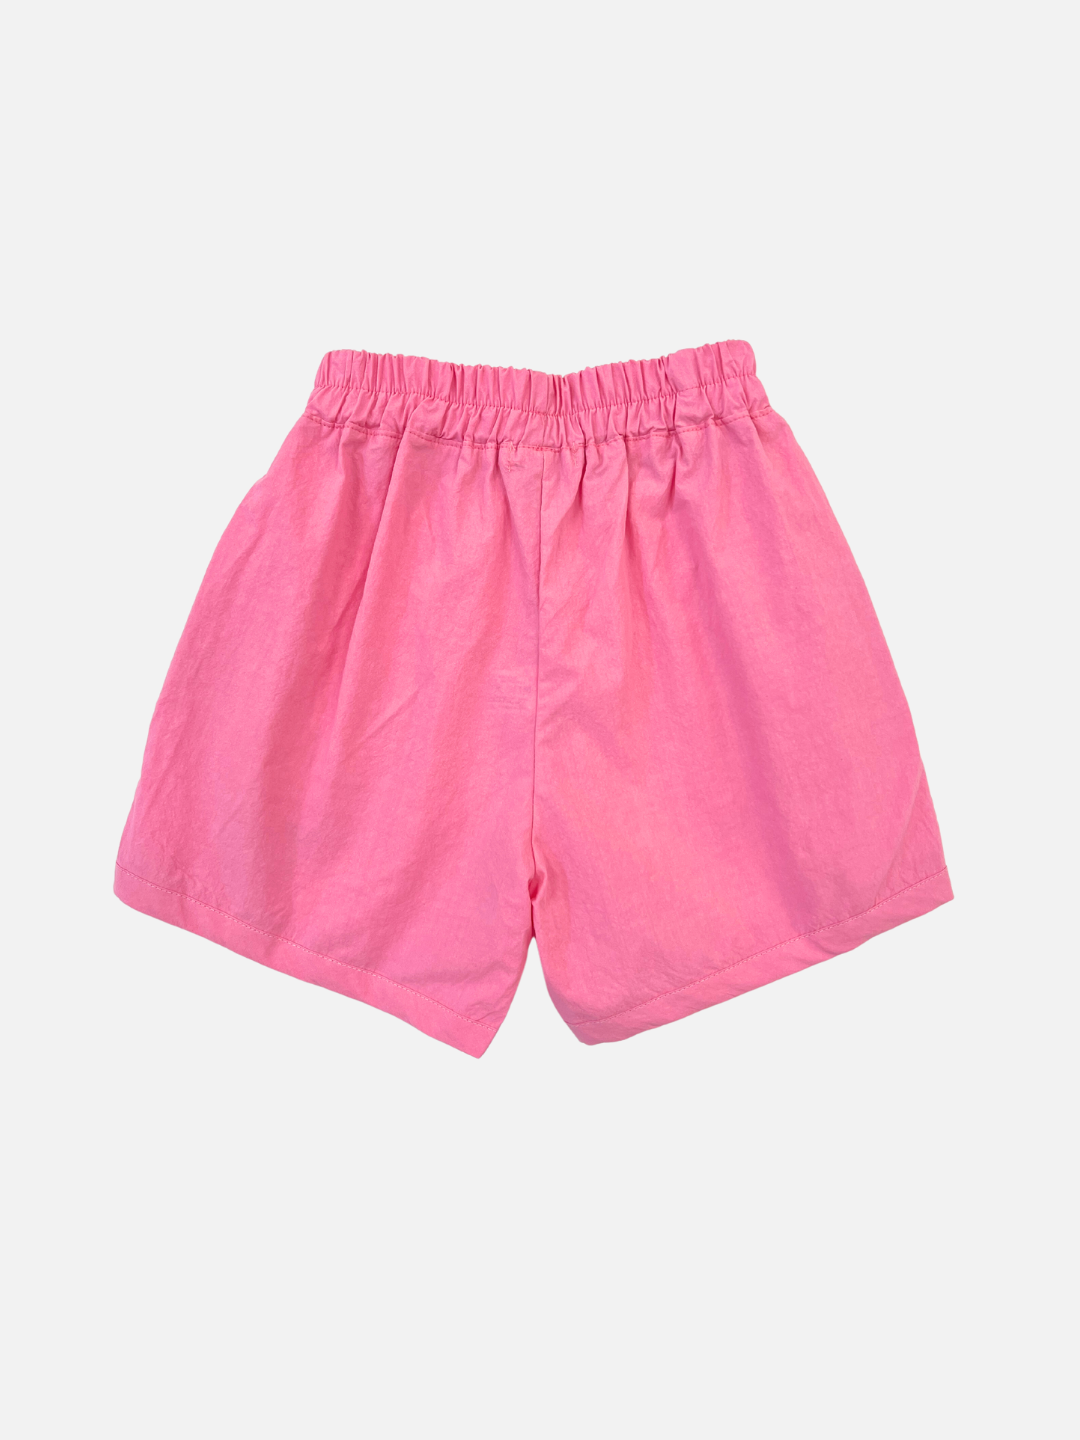 Back view of kids' pink shorts.